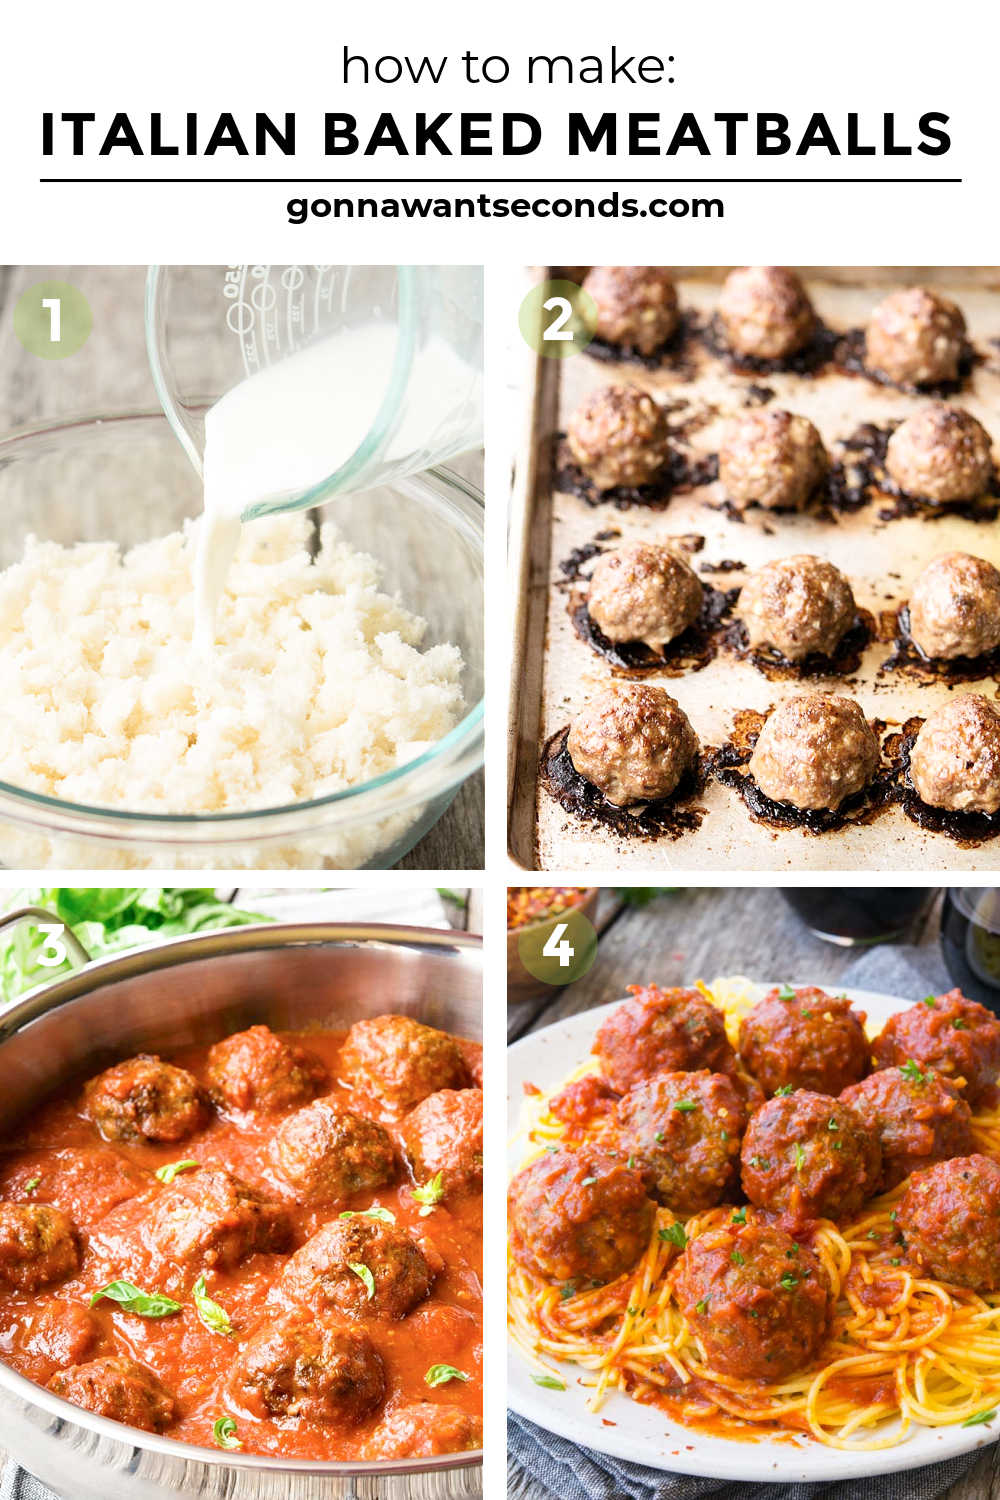 Step by step how to make Italian baked meatballs